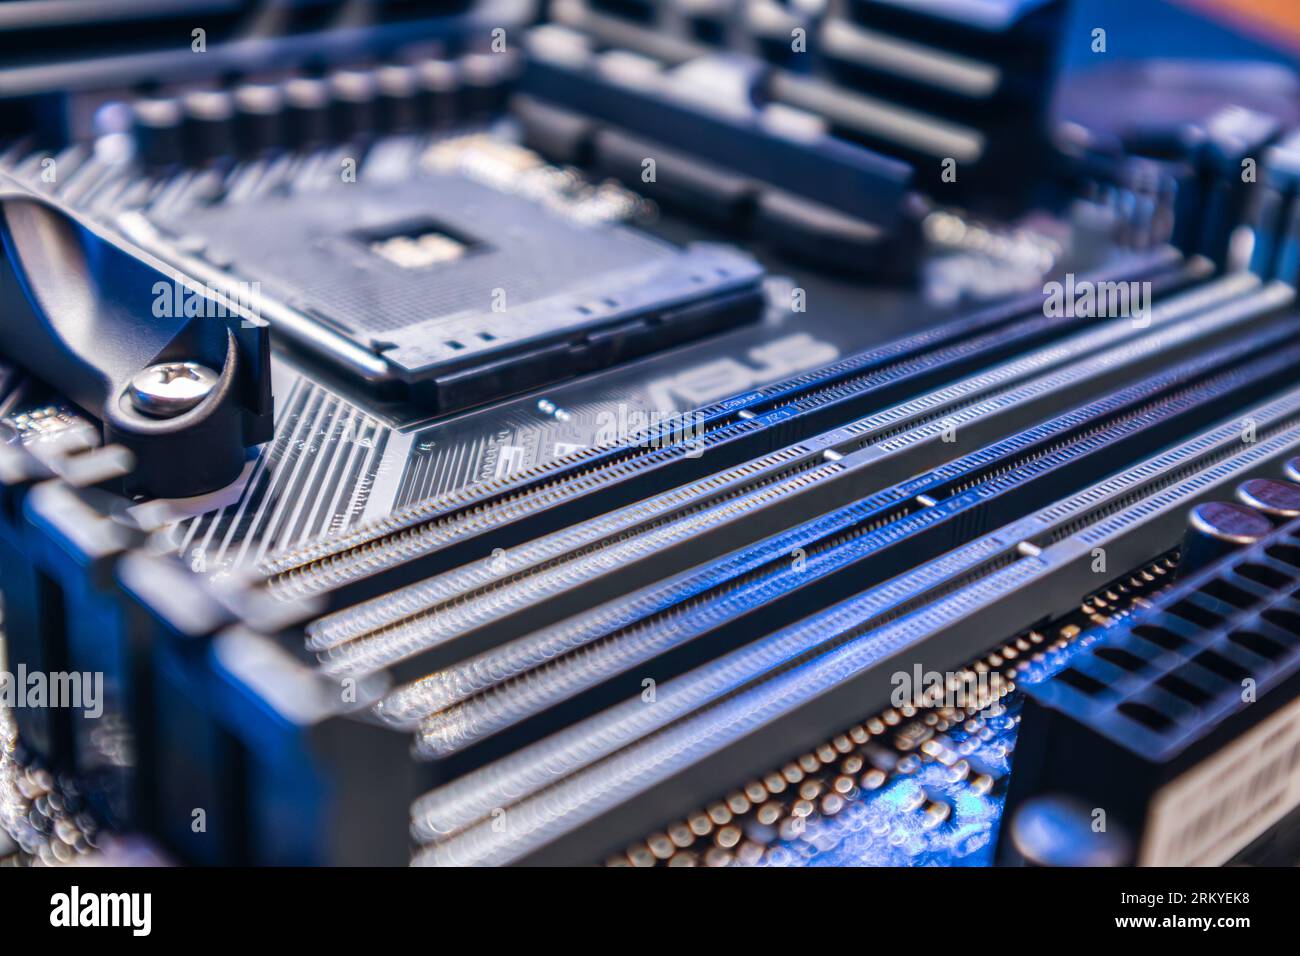 Modern PC motherboard with AM4 CPU Socket. Computer hardware chipset components close-up in blue light. Tech industry electronics background Stock Photo